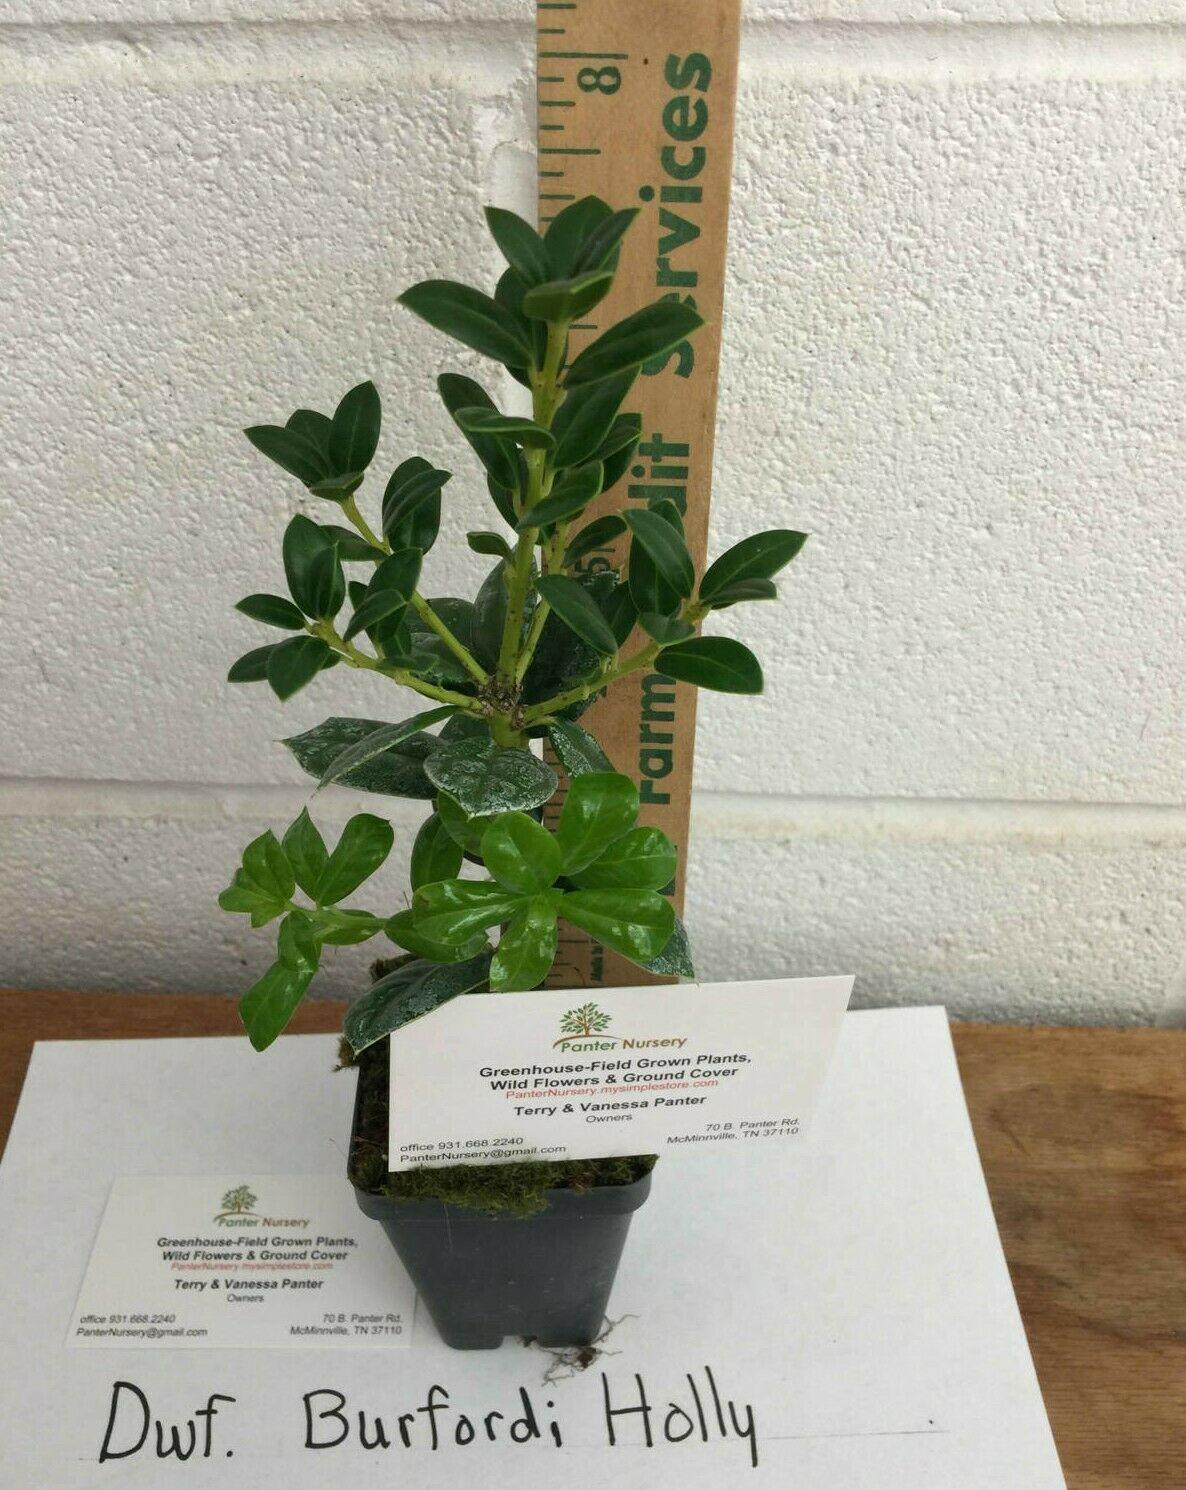 2 Dwarf Burford Holly Shrubs/Hedges - Live Potted Plants - 6-12" Tall - 4" Pot - The Nursery Center